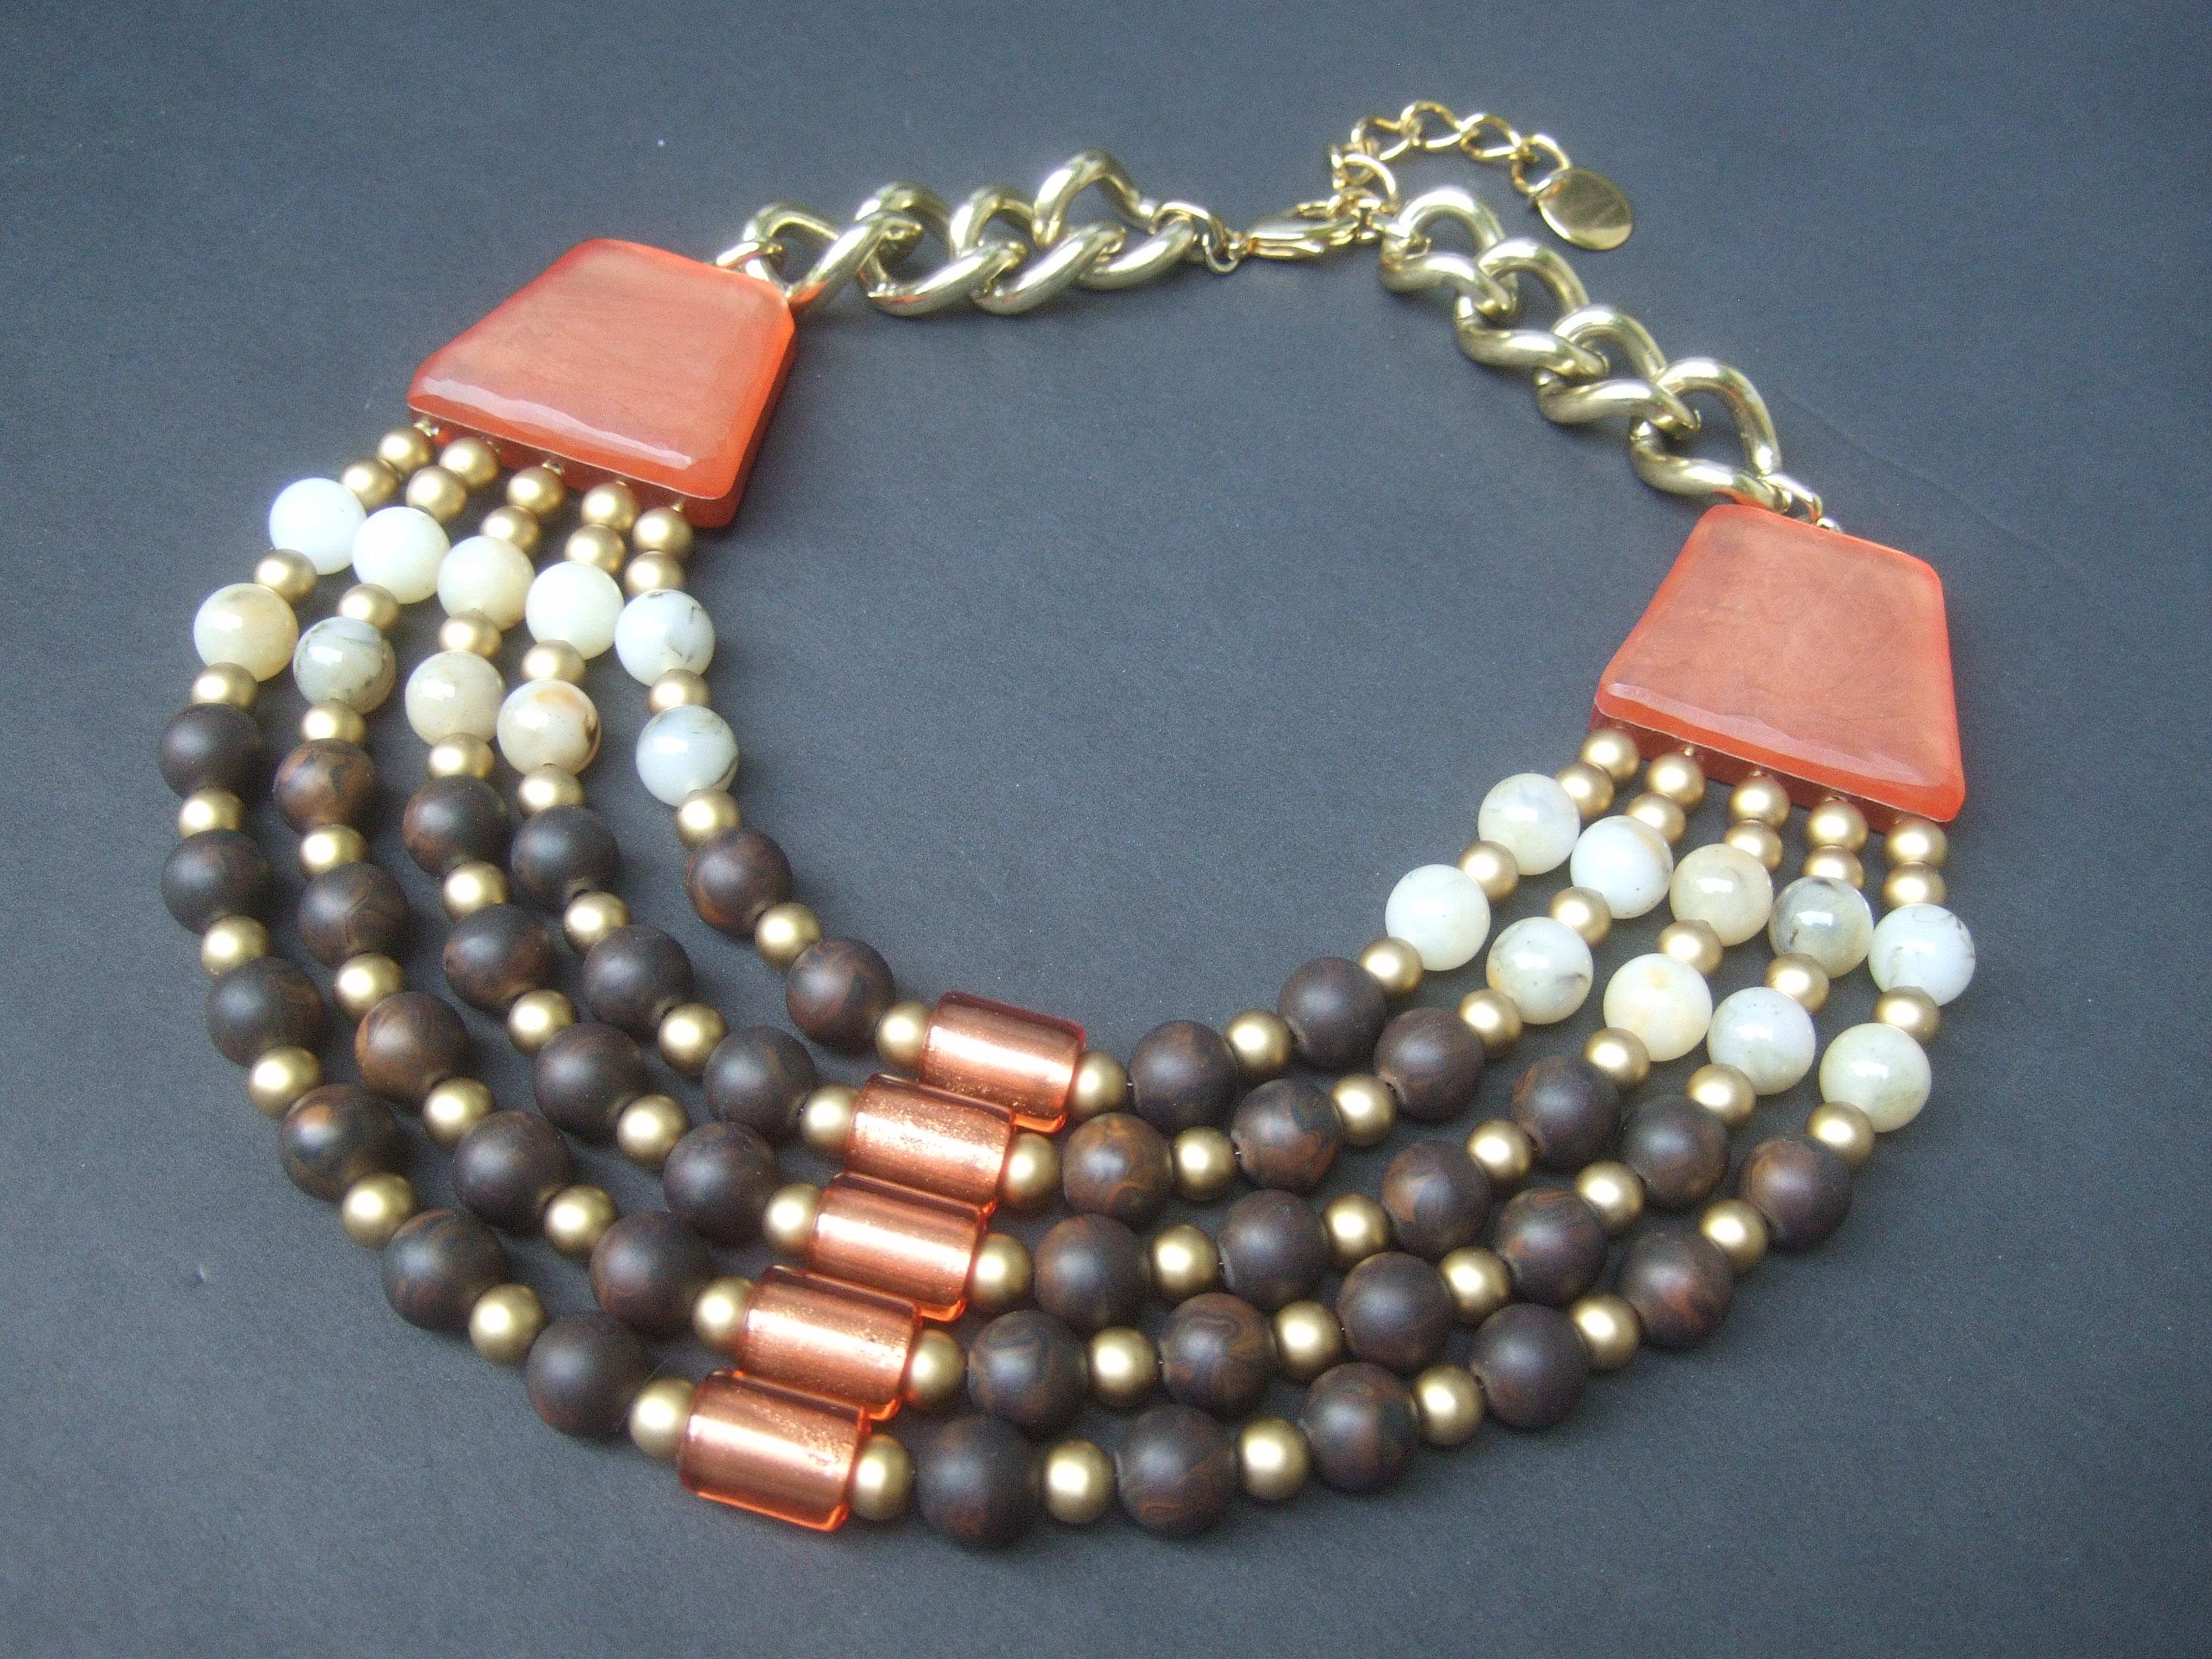 Women's Italian Resin Beaded Bib Statement Necklace Designed by Pono c 1980s For Sale